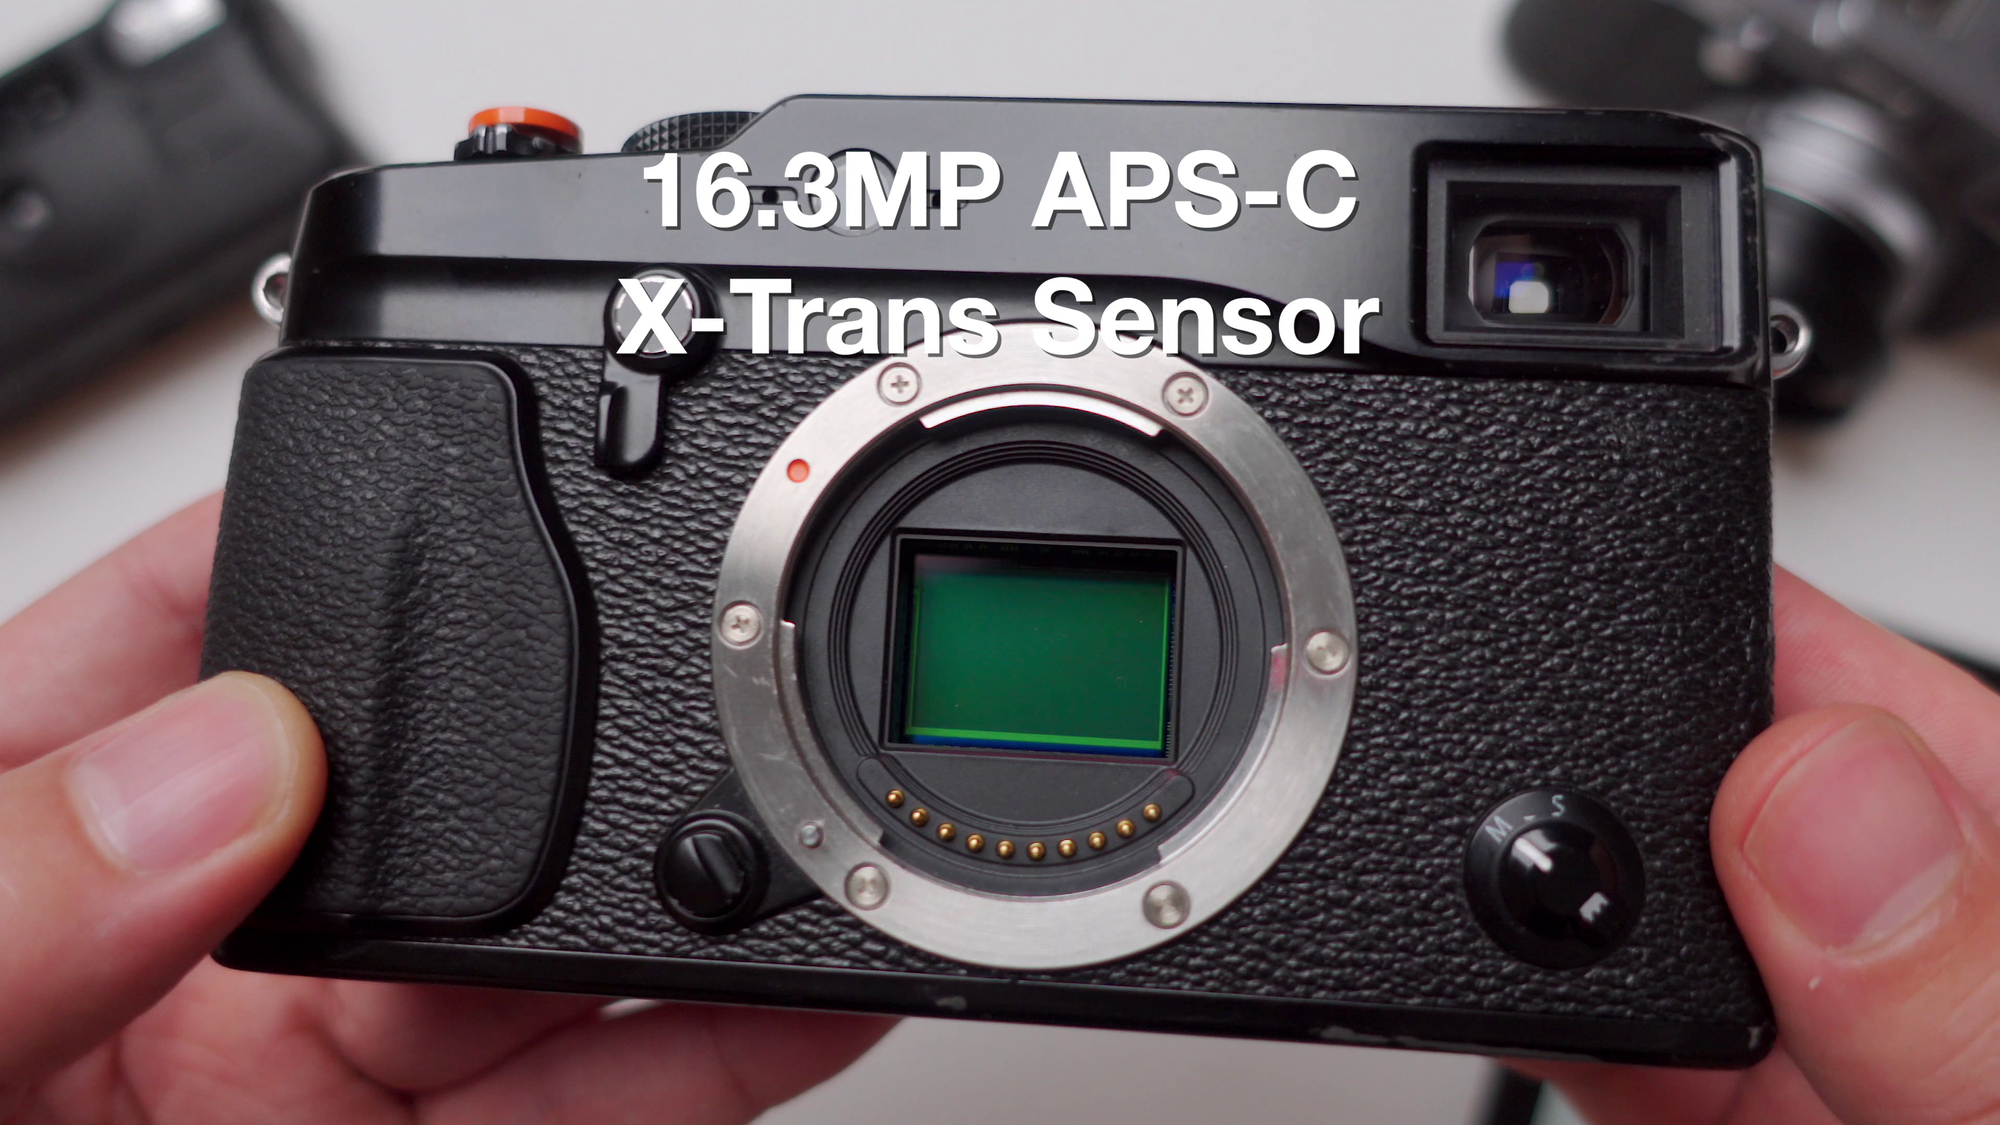 Fujifilm X-Pro1 In 2022 - Updated Review With Samples